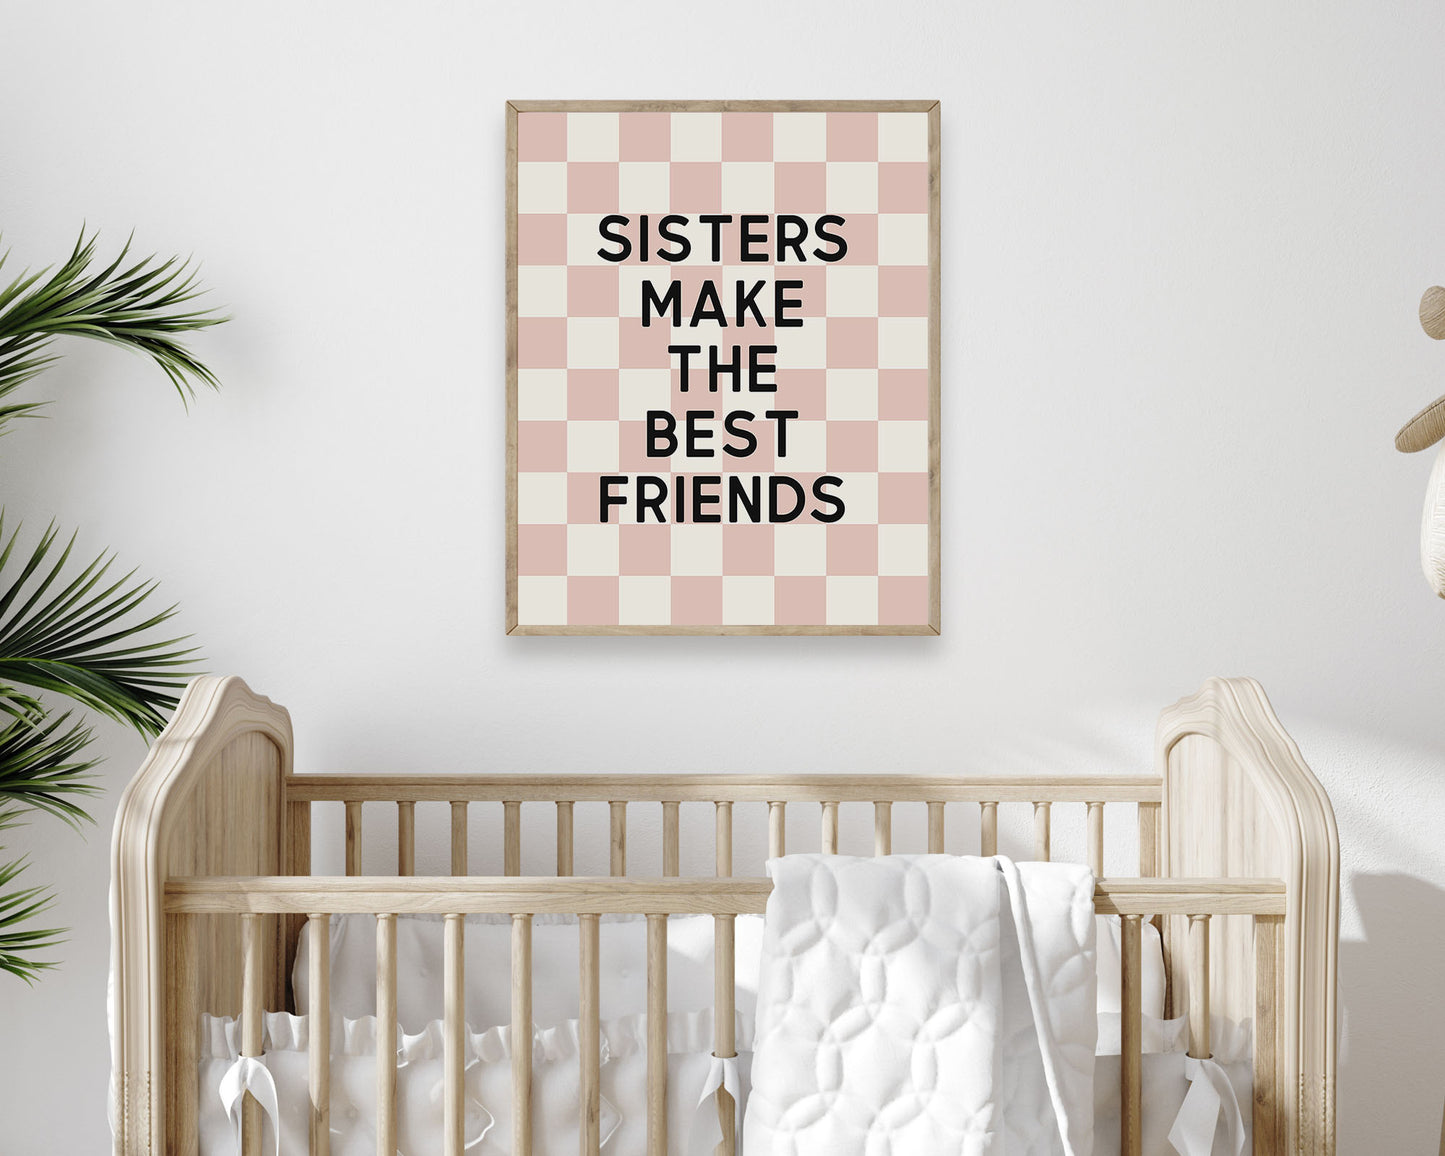 Sisters Make The Best Friends Instant Download Digital File featuring block lettering in black on a blush pink and off white checkered background.